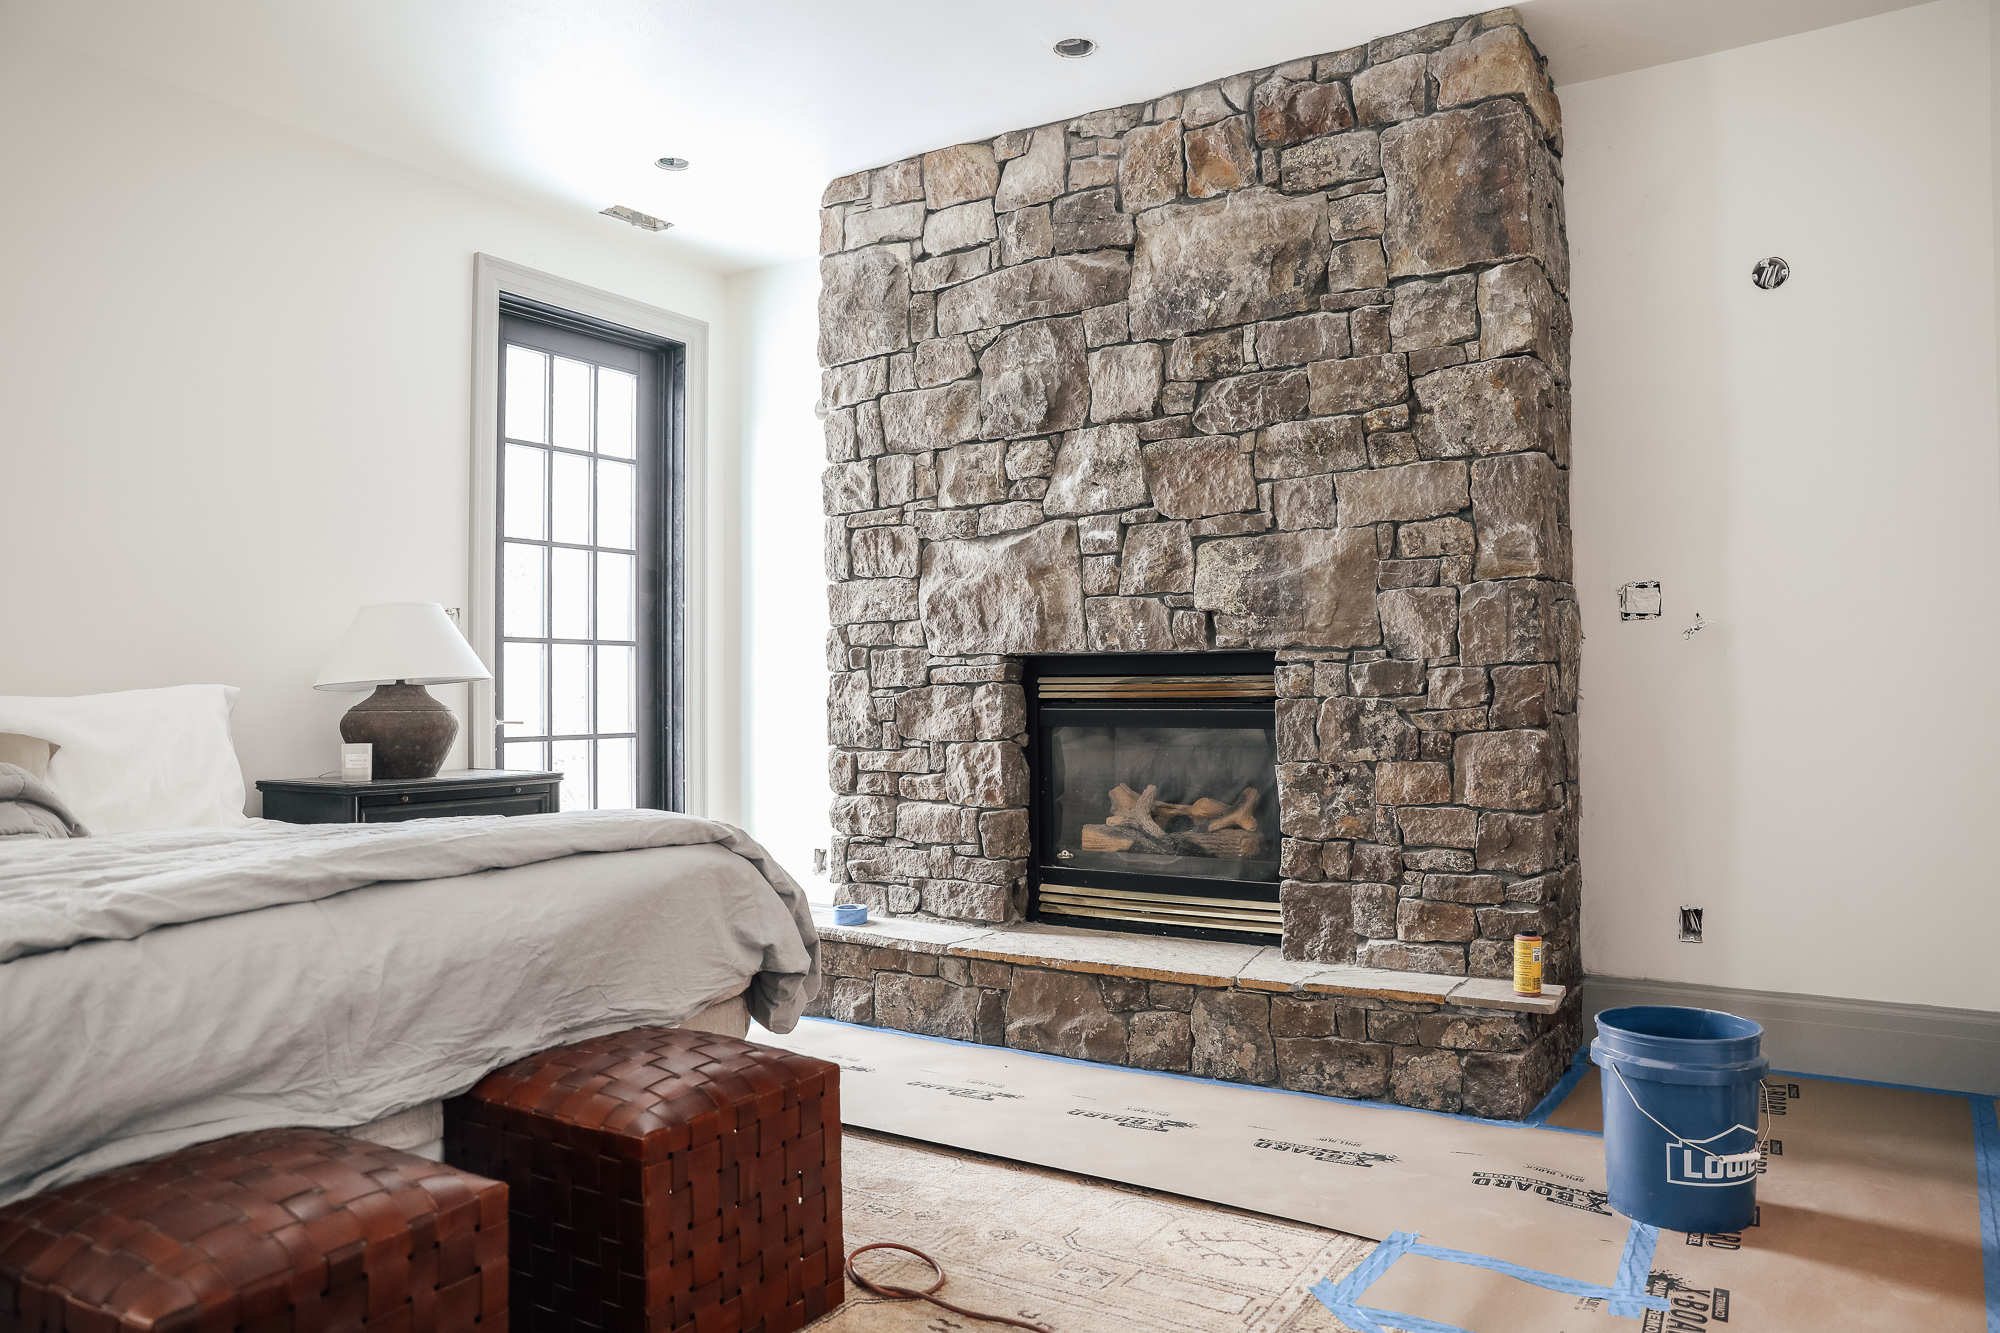 An update on our painted stone fireplace